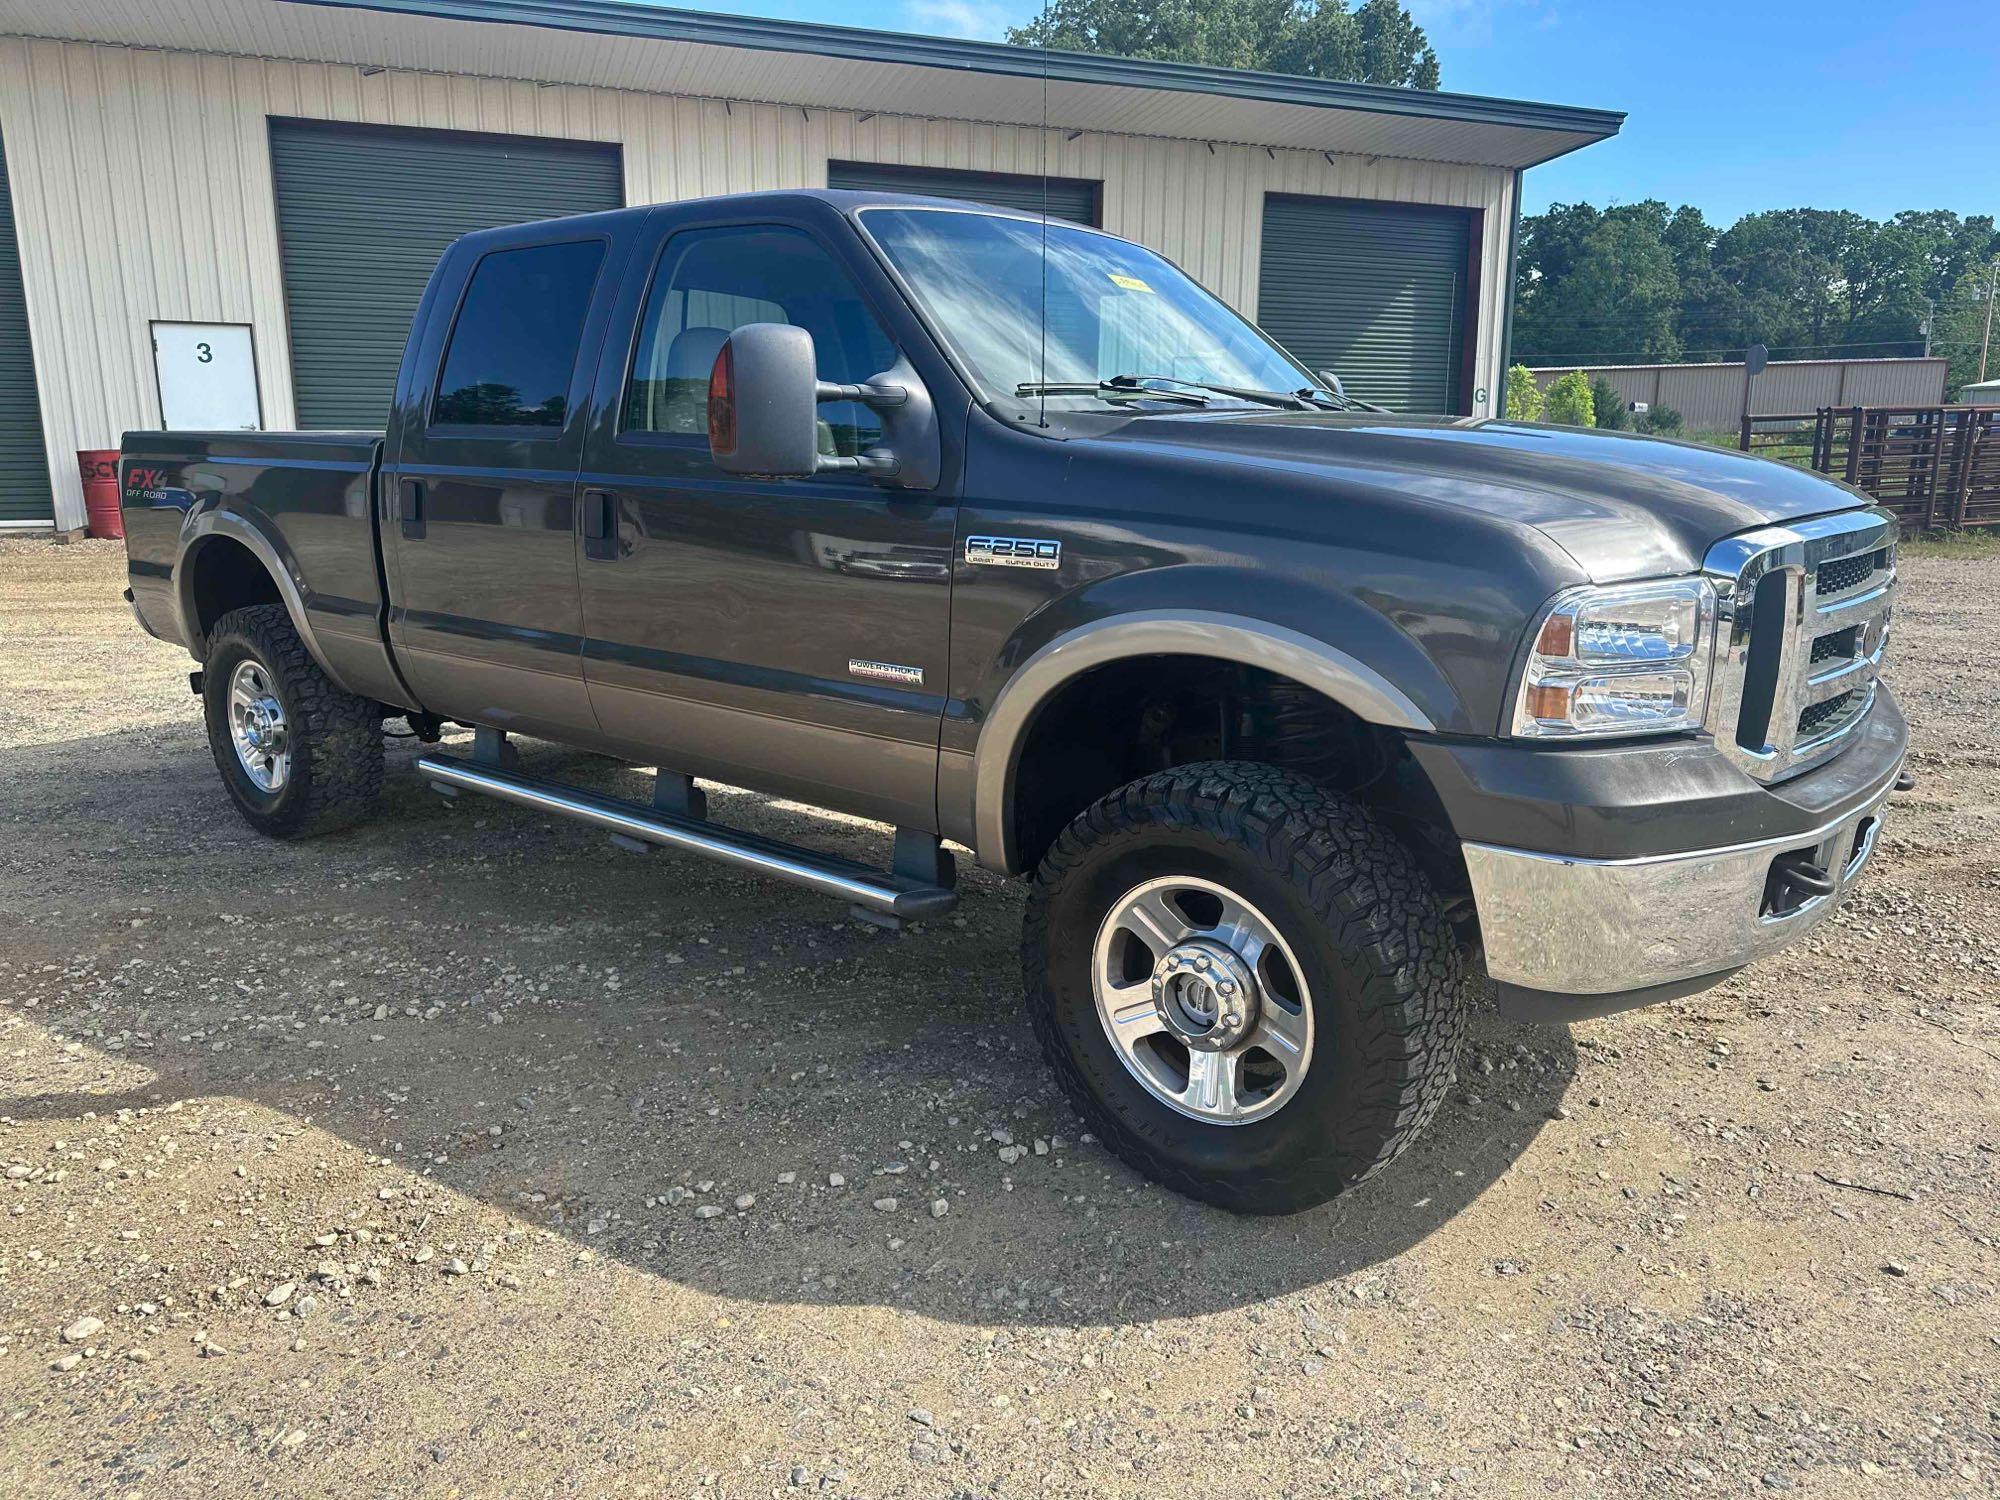 2007 Ford F-250 Pickup 4x4 Truck, VIN # 1FTSW21P07EA62560